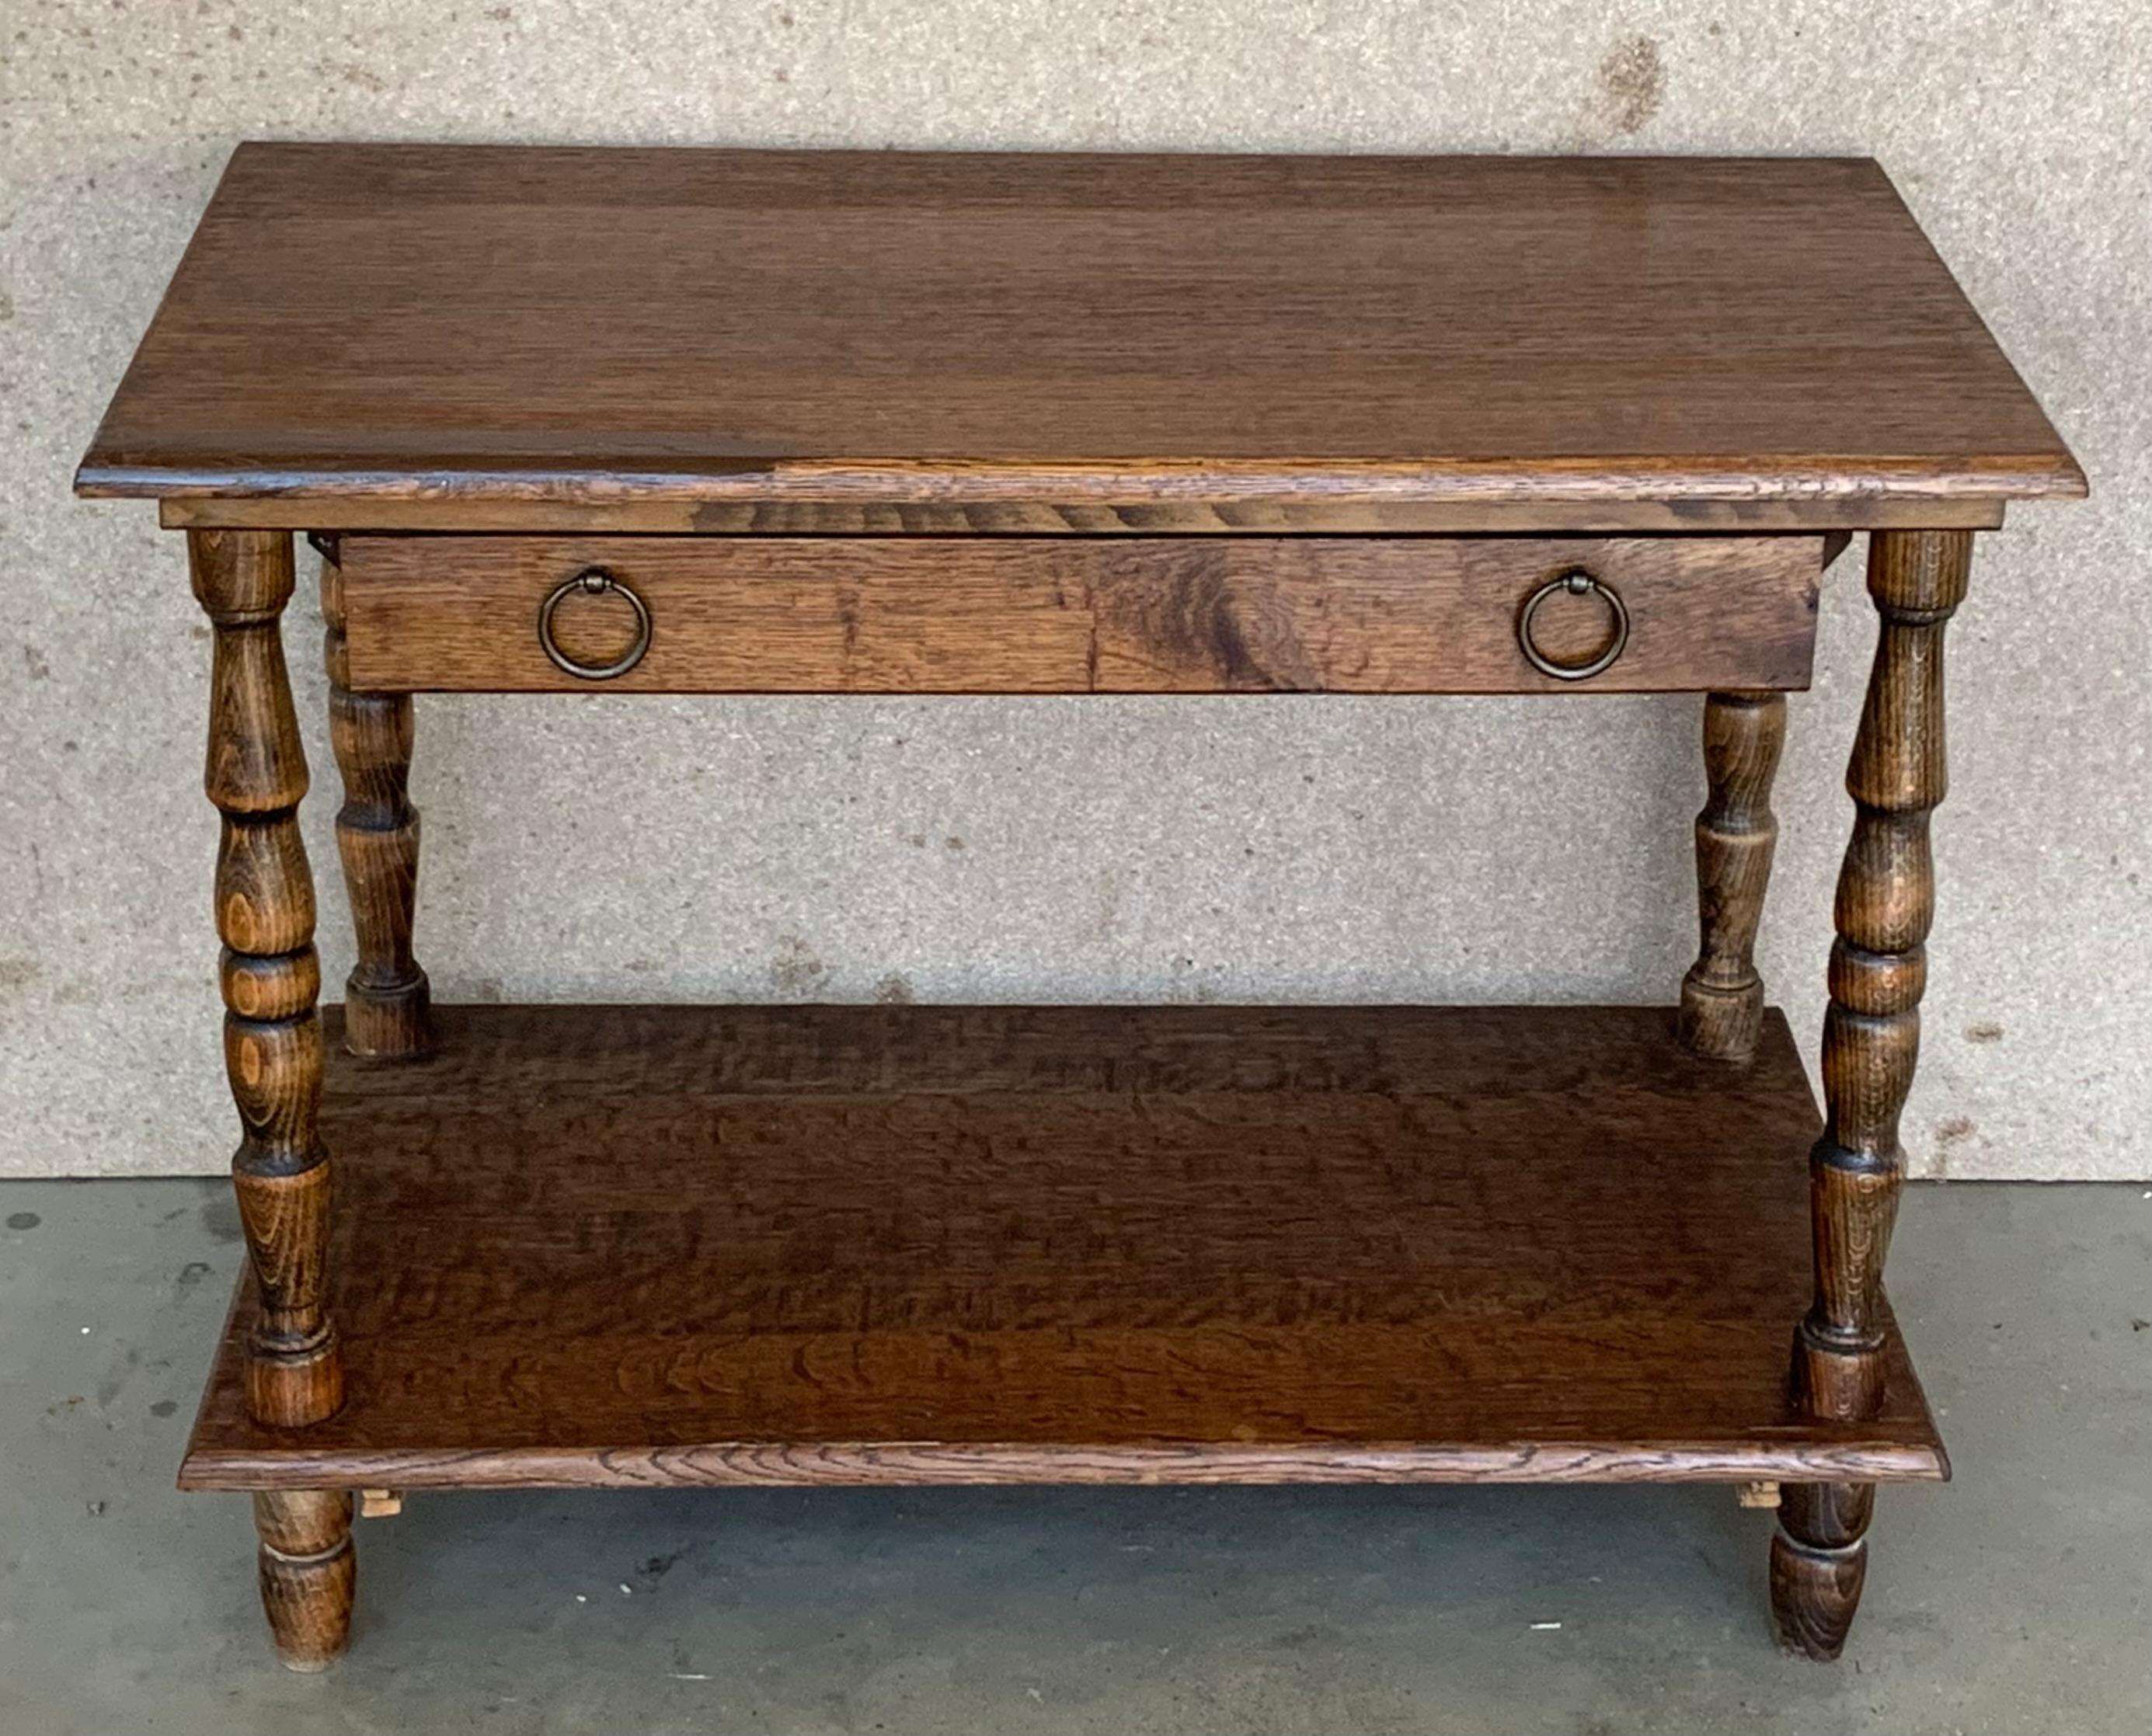 Spanish Country Pine Side Table with Drawer and Low Shelve In Good Condition For Sale In Miami, FL